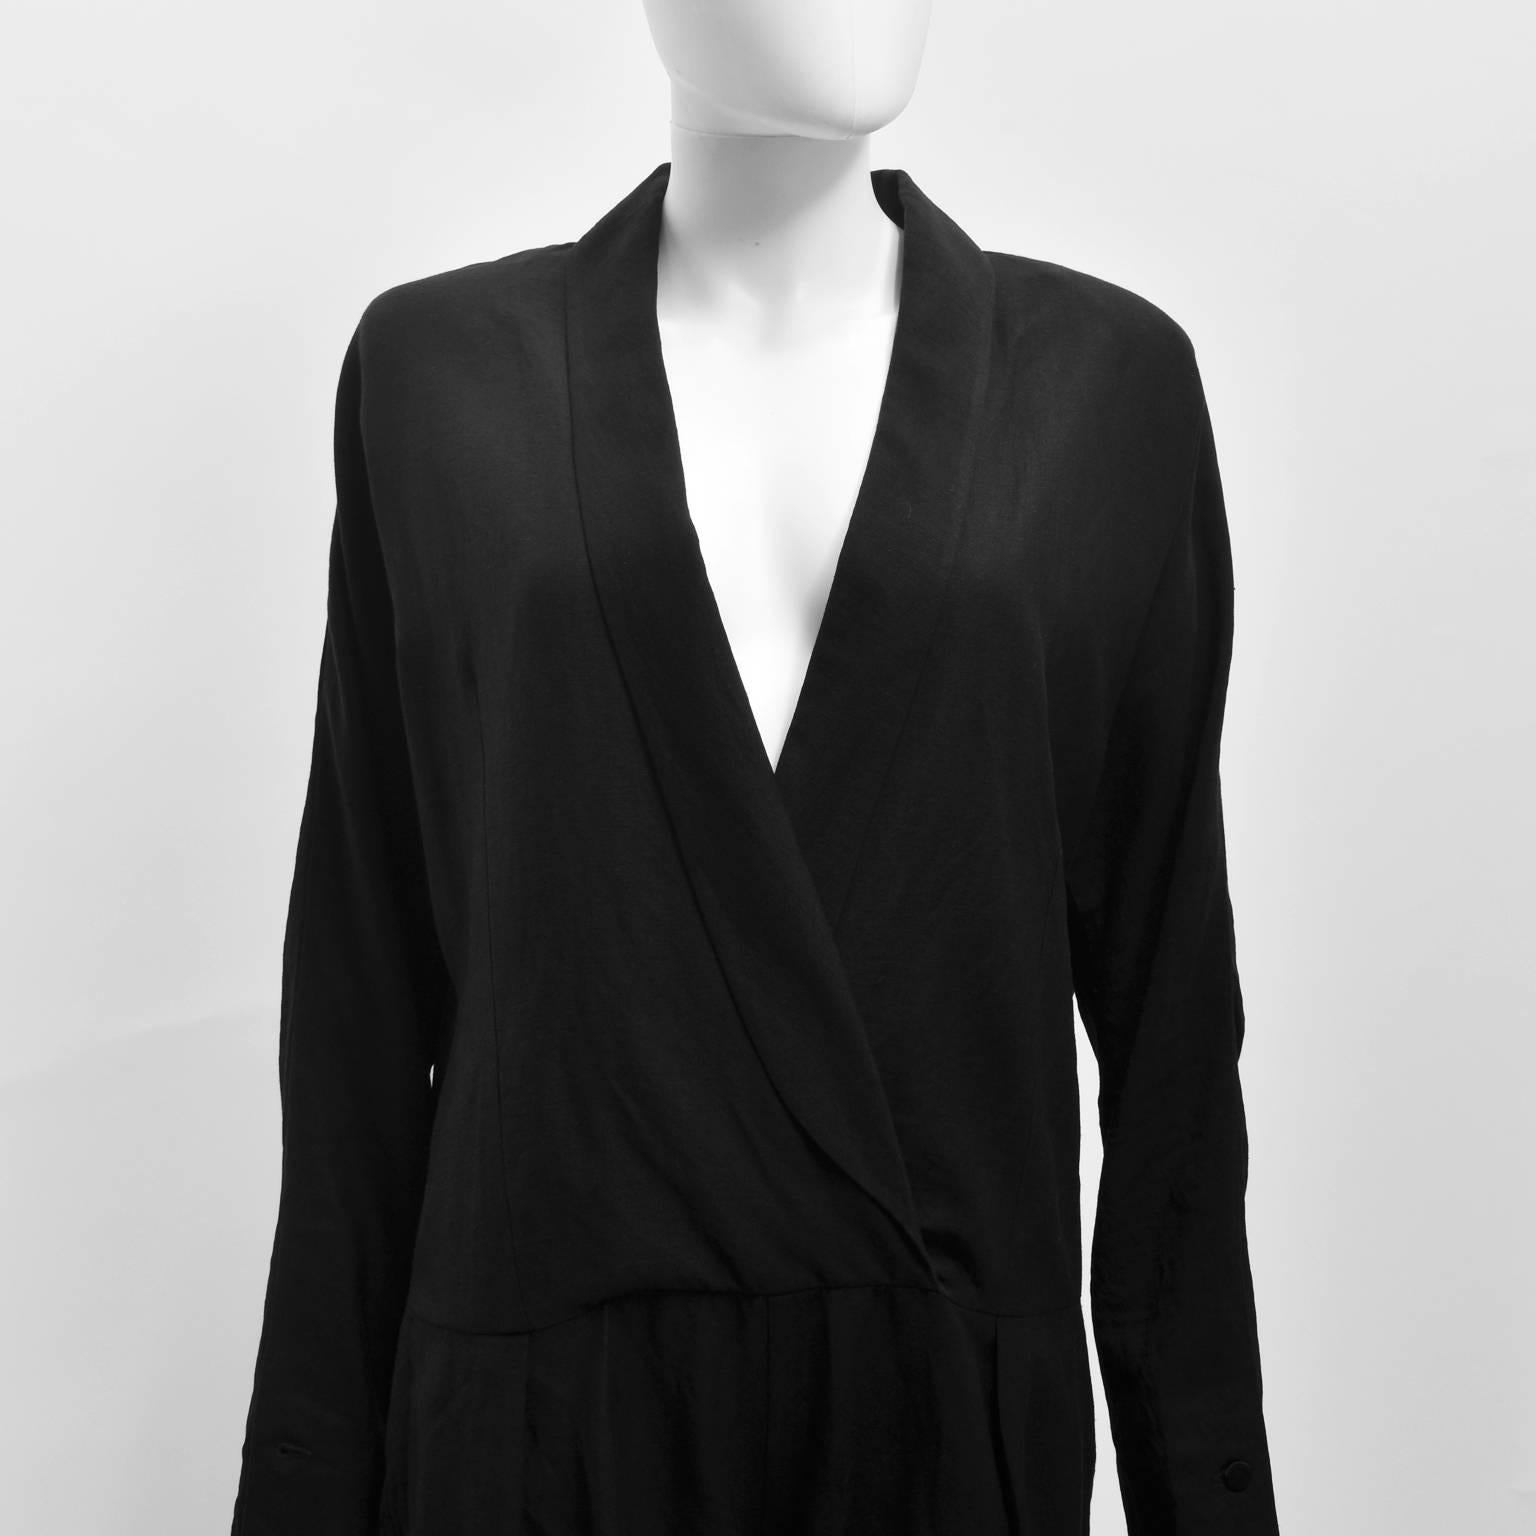 A classic black tuxedo jumpsuit from French designer Isabel Marant. The jumpsuit has long sleeves, a crossover V-neck opening with lapels, dropped waist and relaxed trouser shape. The construction of the sleeves is unusual, with a slim forearm that